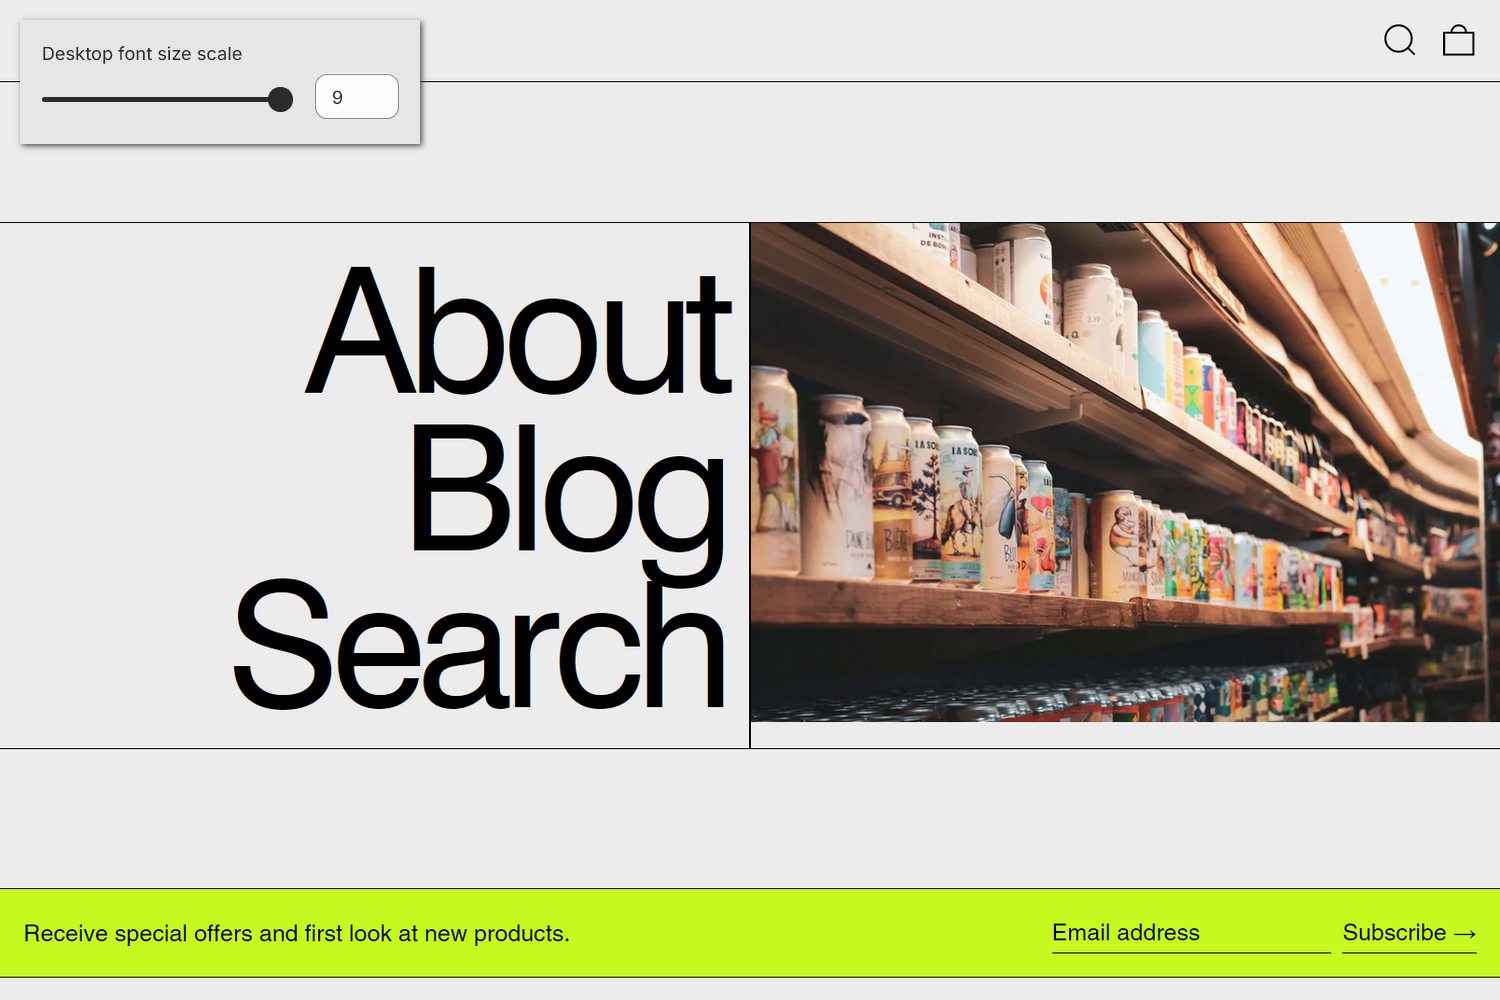 An example Navigation with image section on a store's home page.